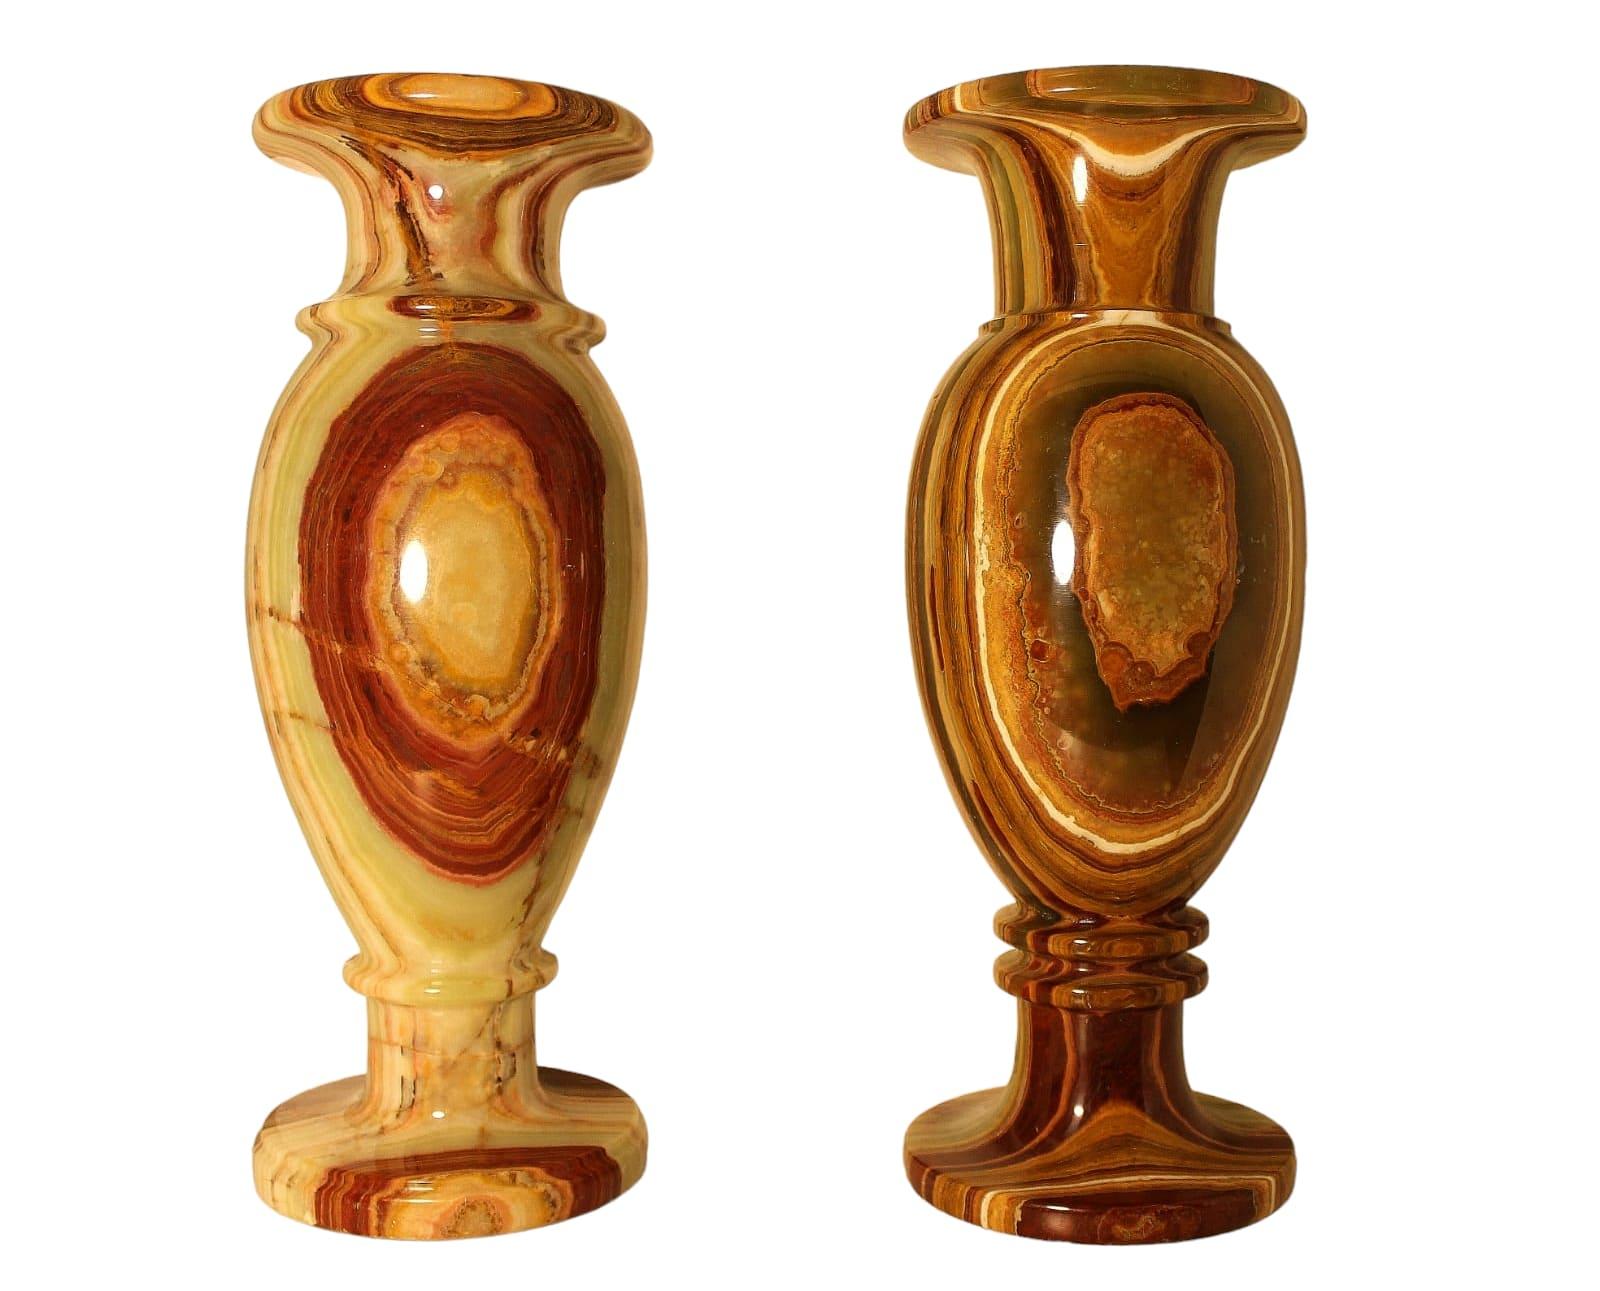 Each vase is intricately carved from a different block of onyx, displaying varying shades of green and reddish veins. In excellent condition, these vases boast the highest quality onyx. Dating back to the 1950s, they measure 41x15x15 cm.

These